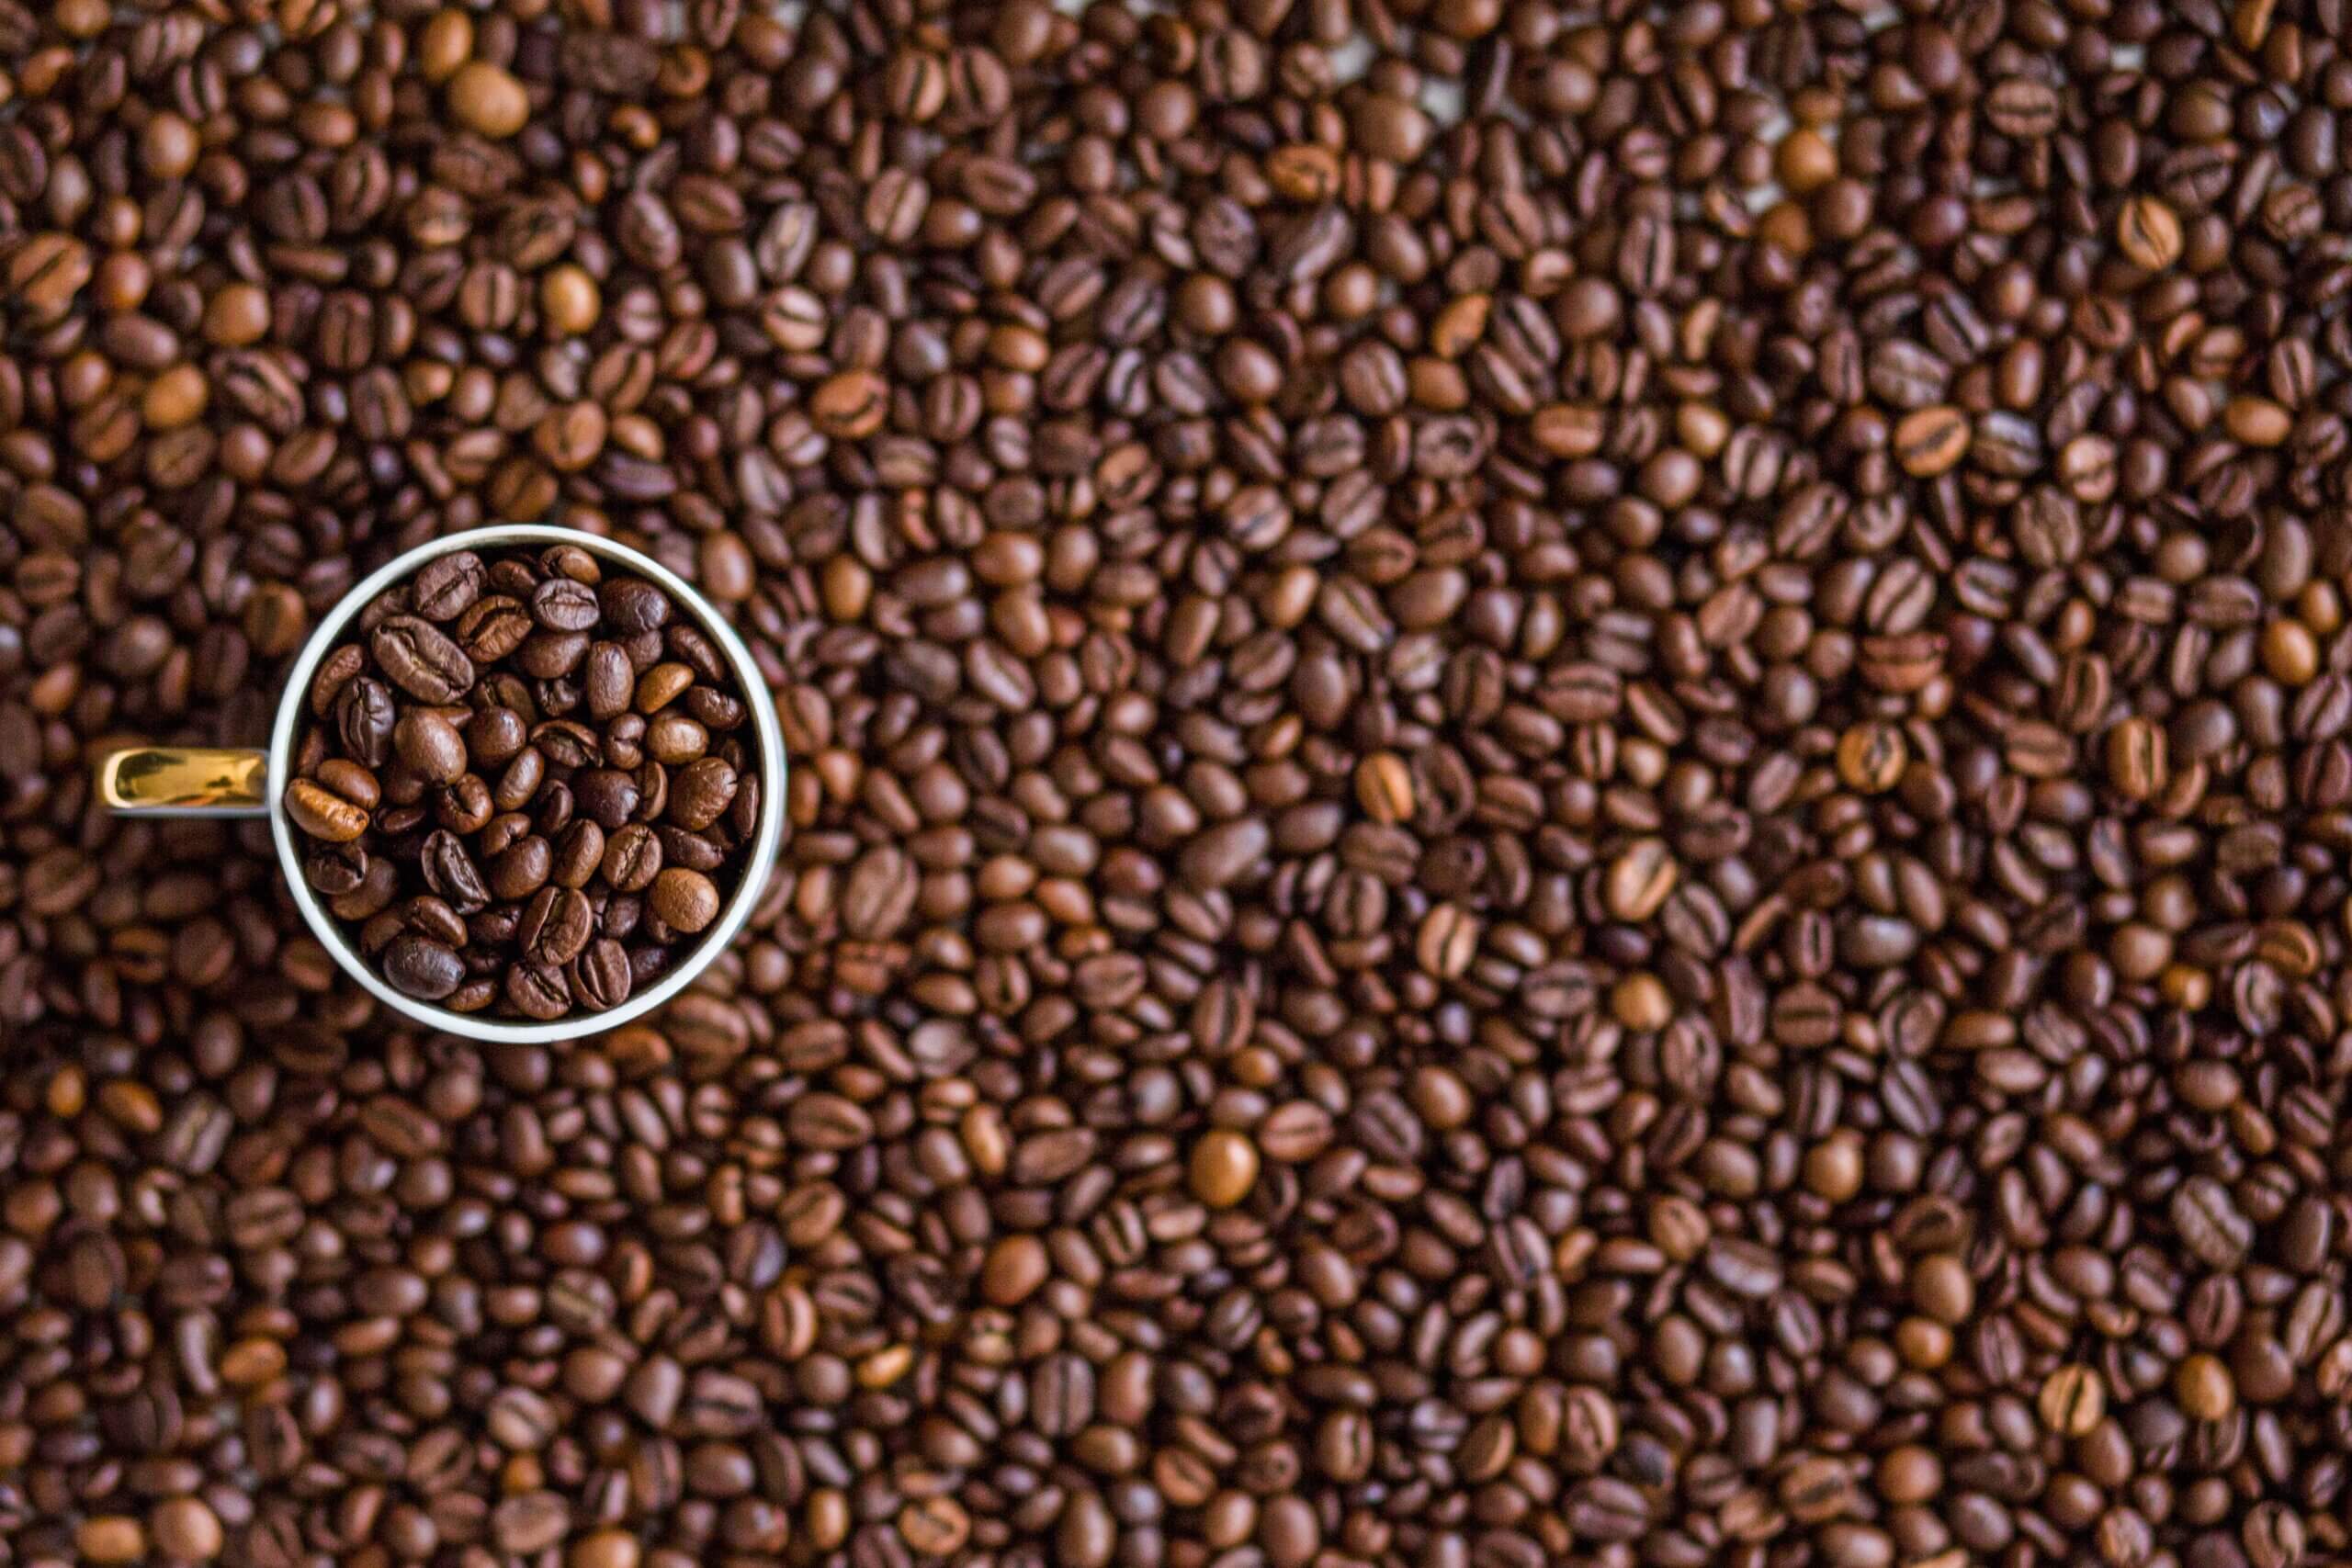 Image of a coffee mug holding coffee beans with coffee beans in the background